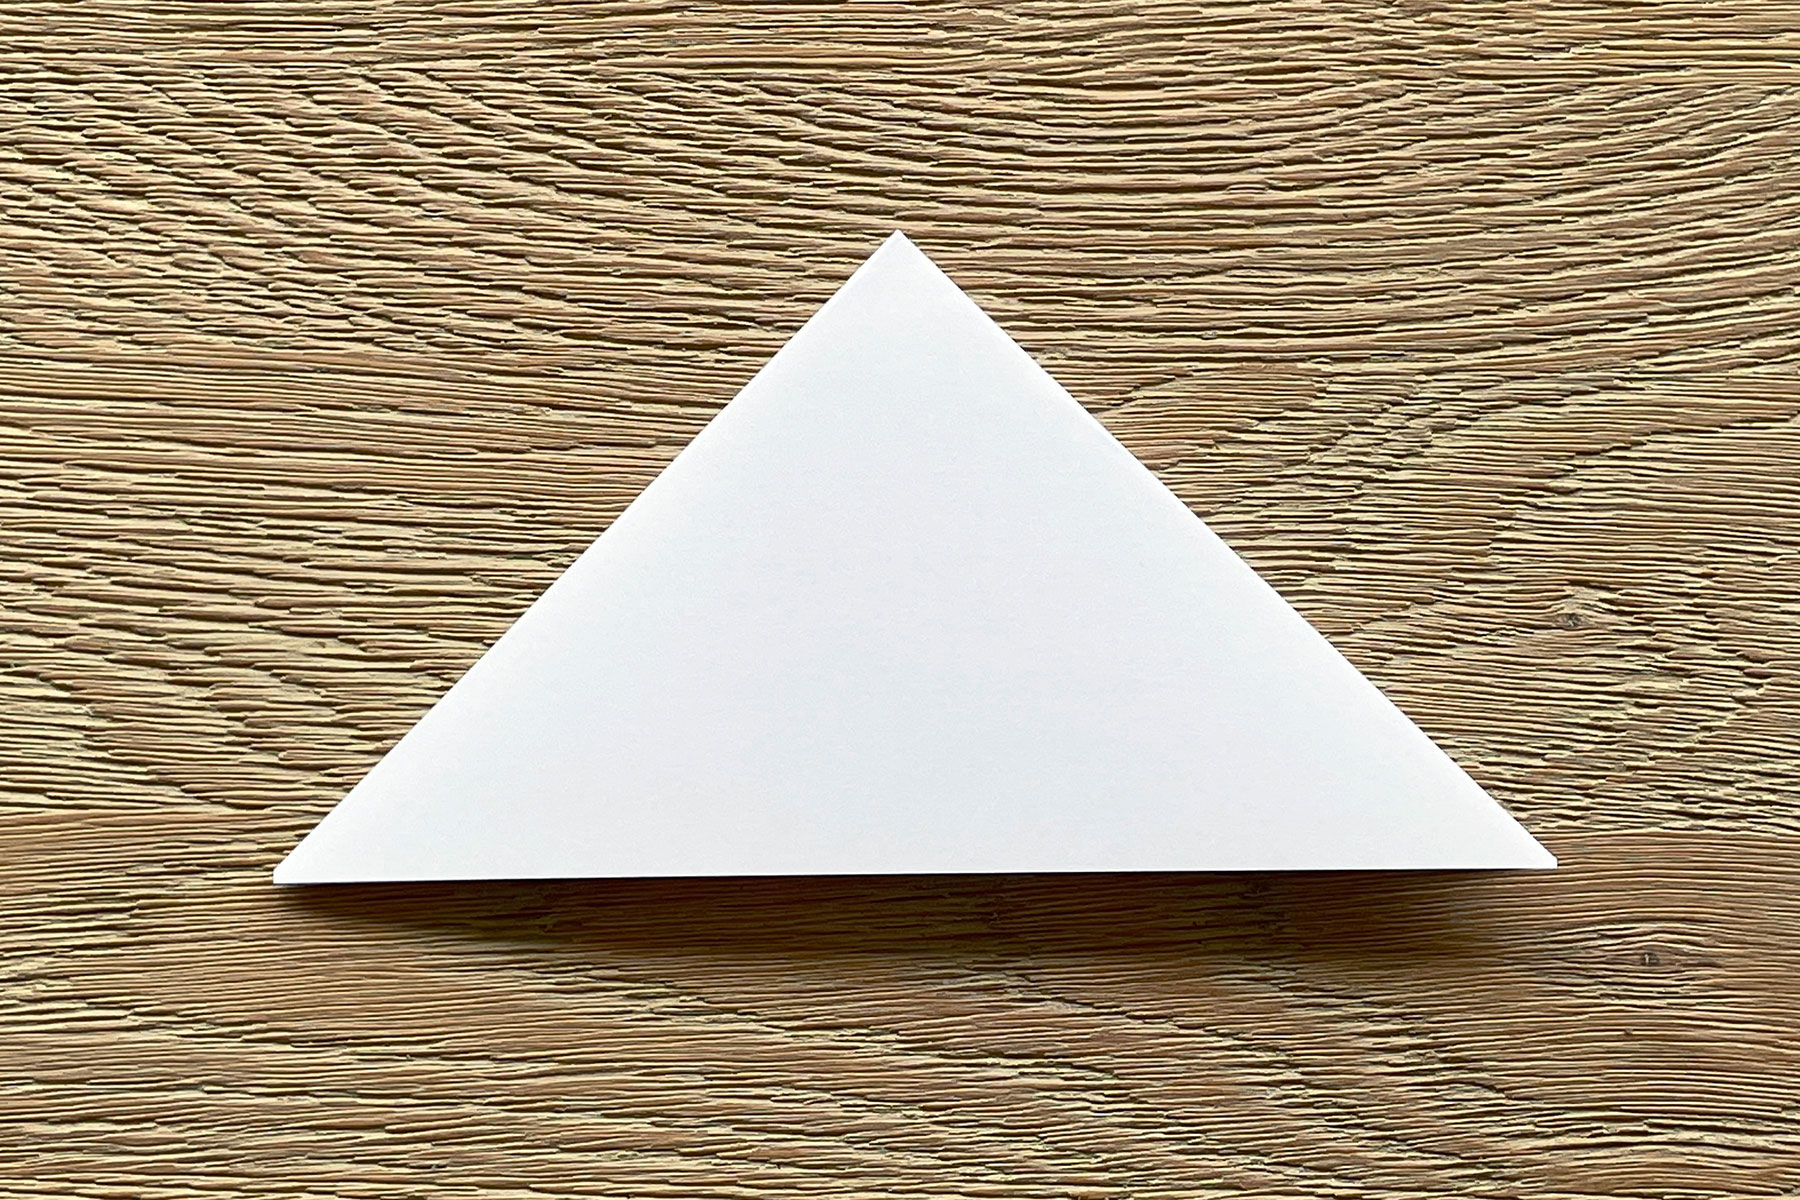 A photo of a square piece of paper that has been folded diagonally